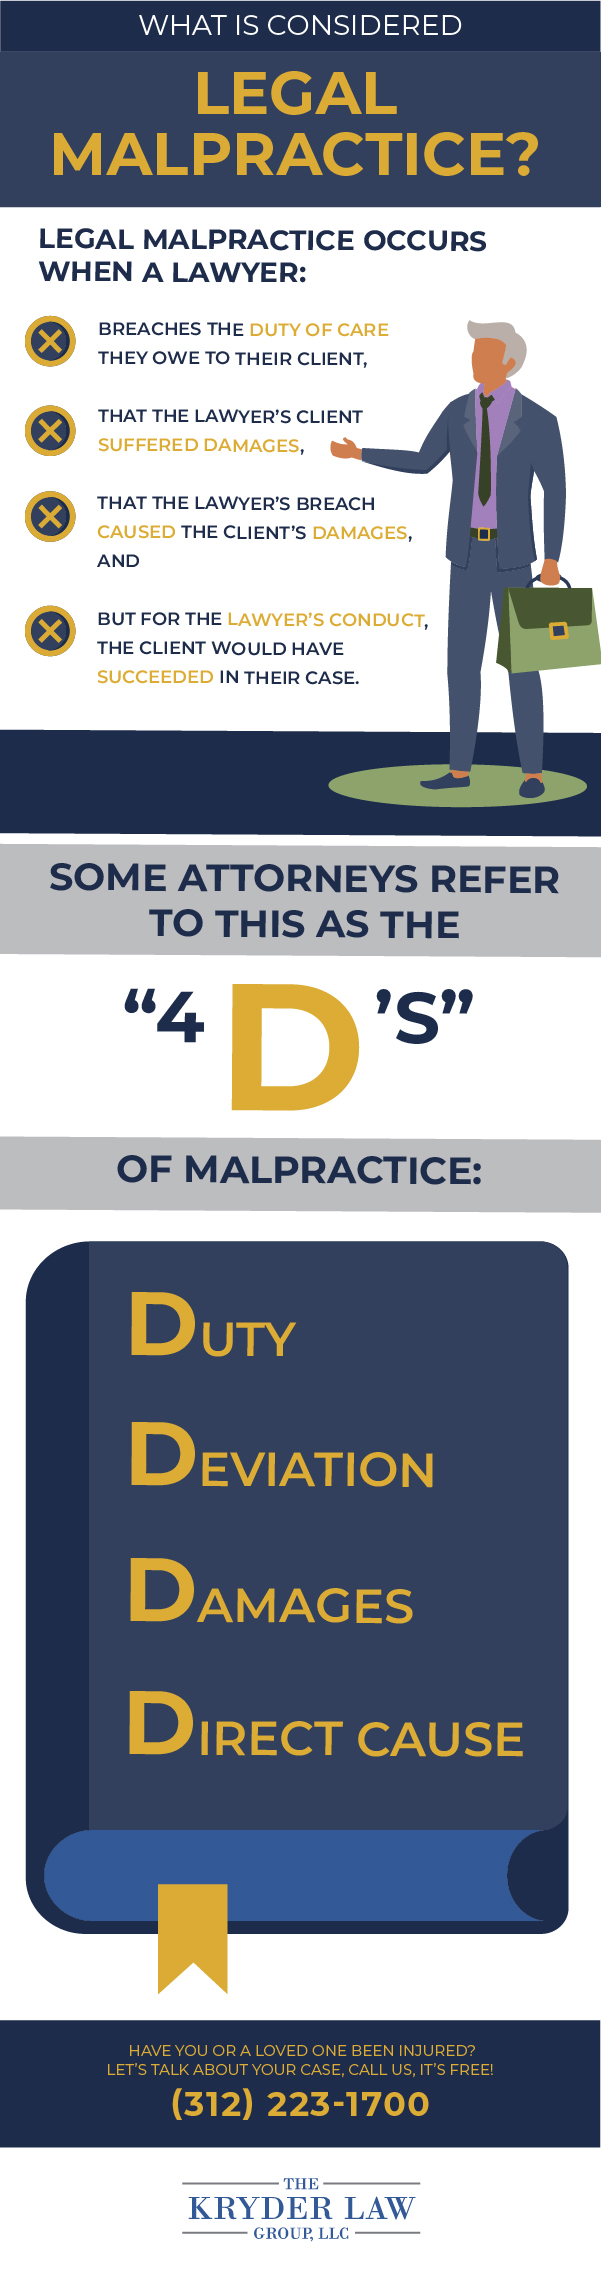 What Is Considered Legal Malpractice Infographic